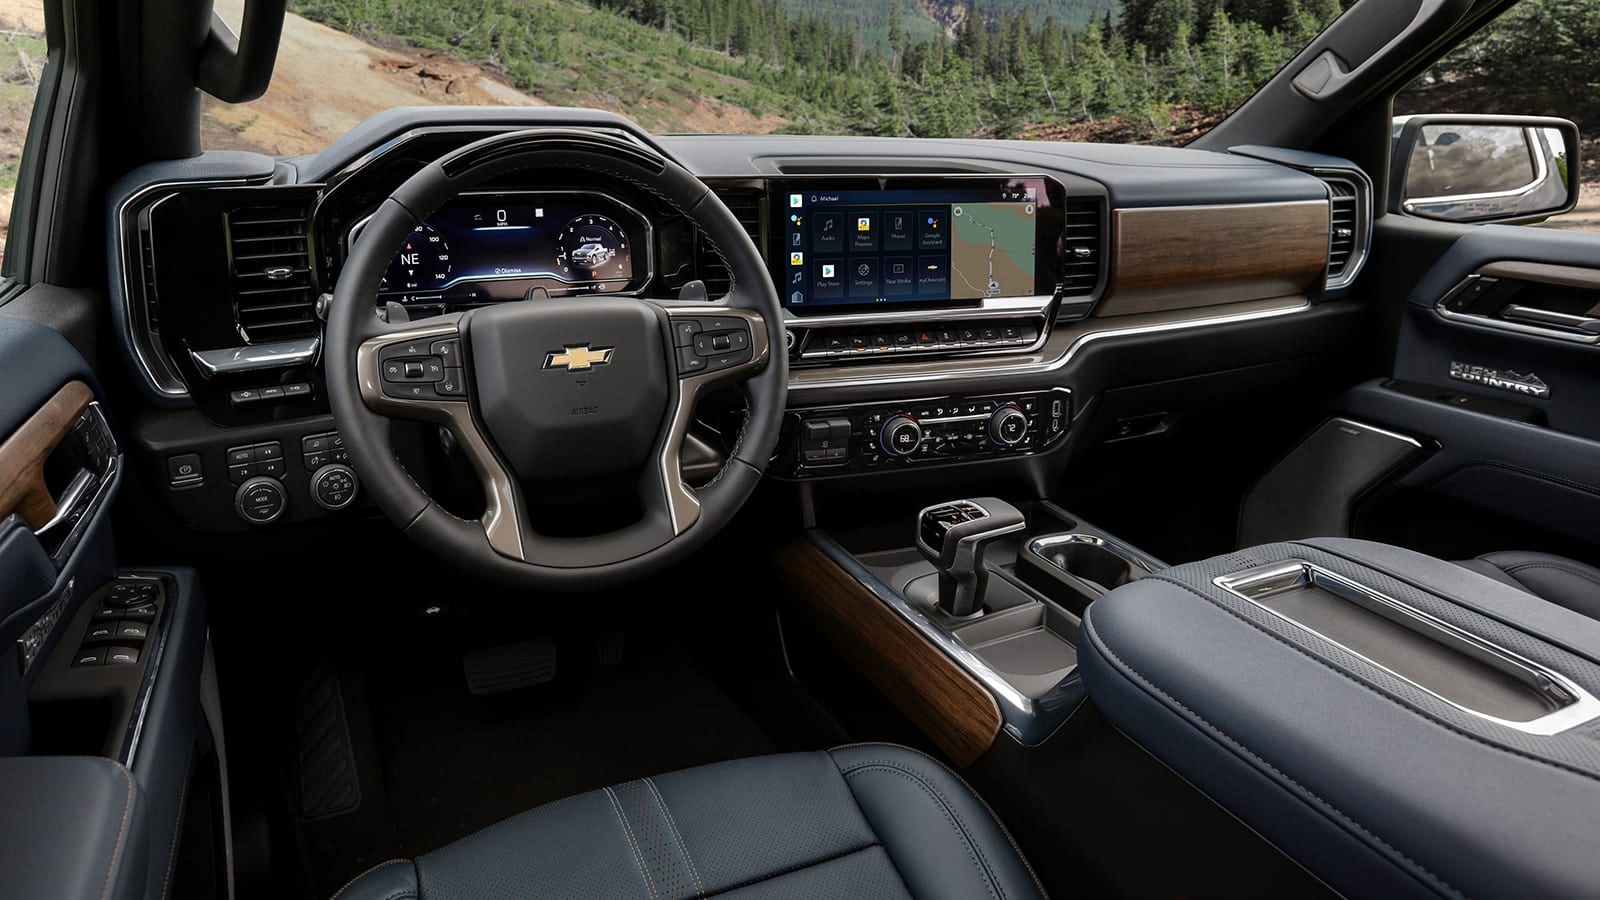 Here's the new 2022 Chevy Silverado interior. It's so much better